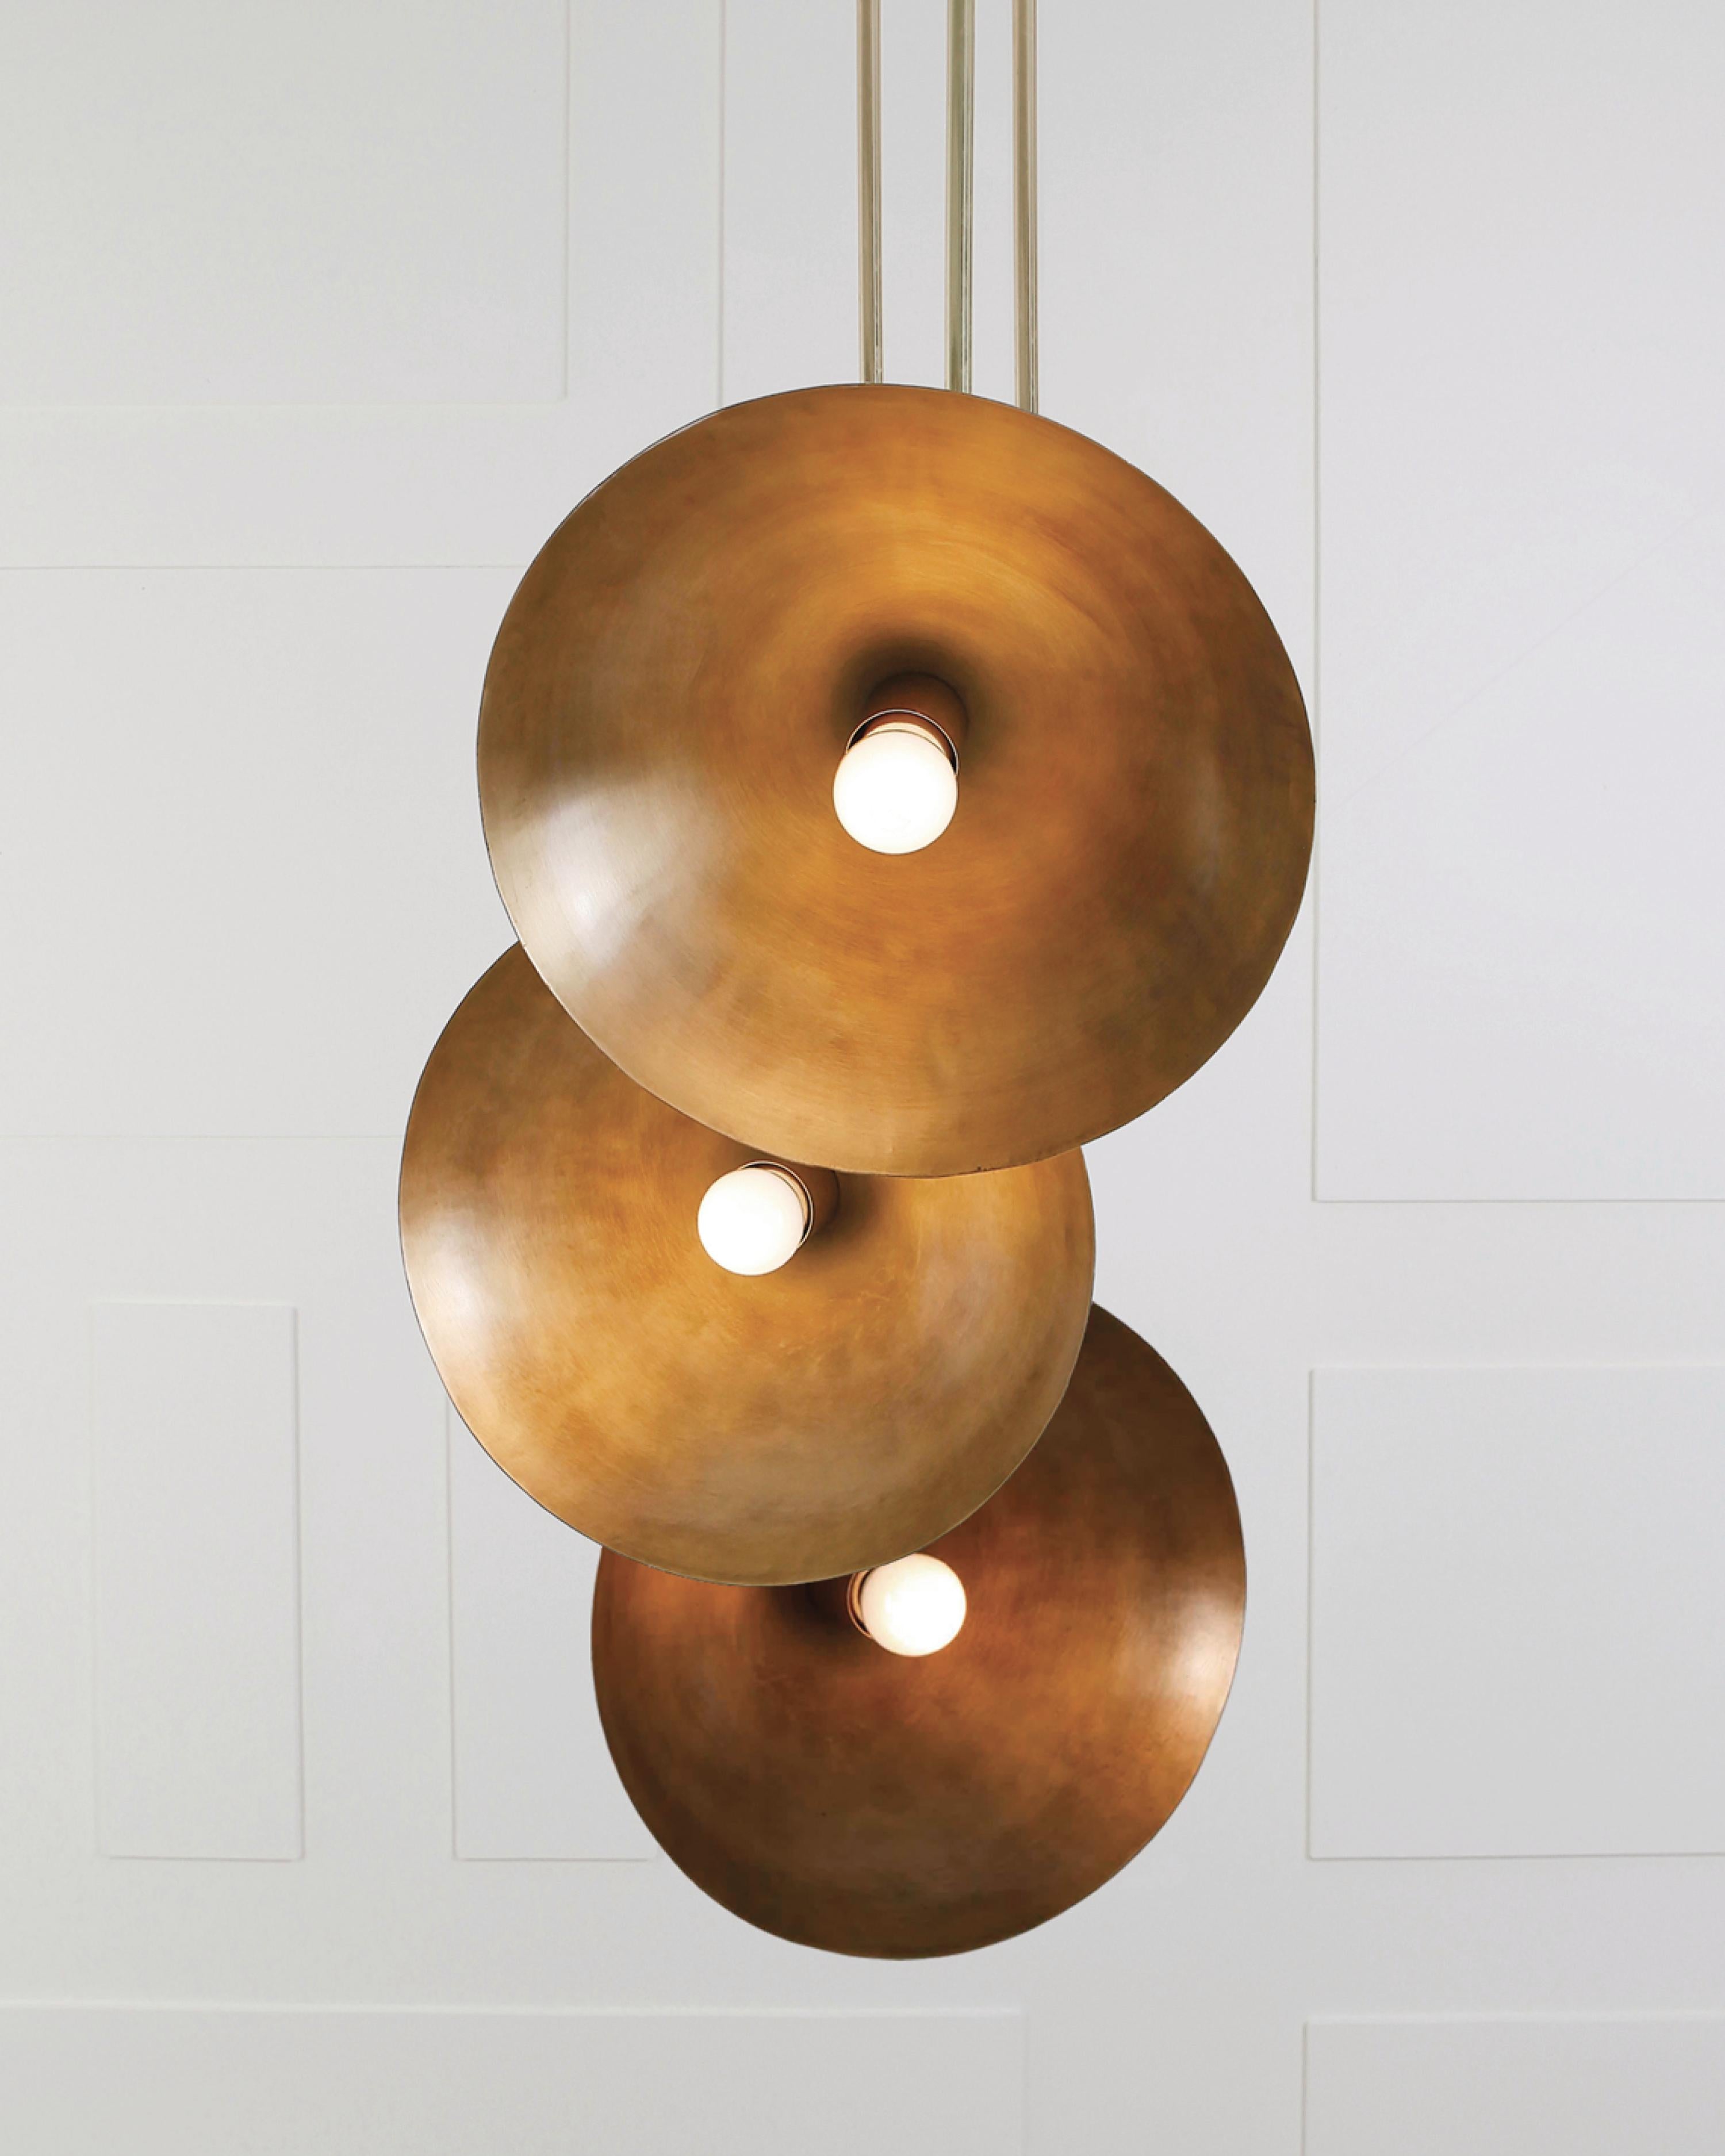 Tango III, sculpted pendant by Paul Matter
Blackened brass with aged brass details.
Shade in blackened brass (also available in aged brass)
exterior and aged interiors.
Dimensions: H 58